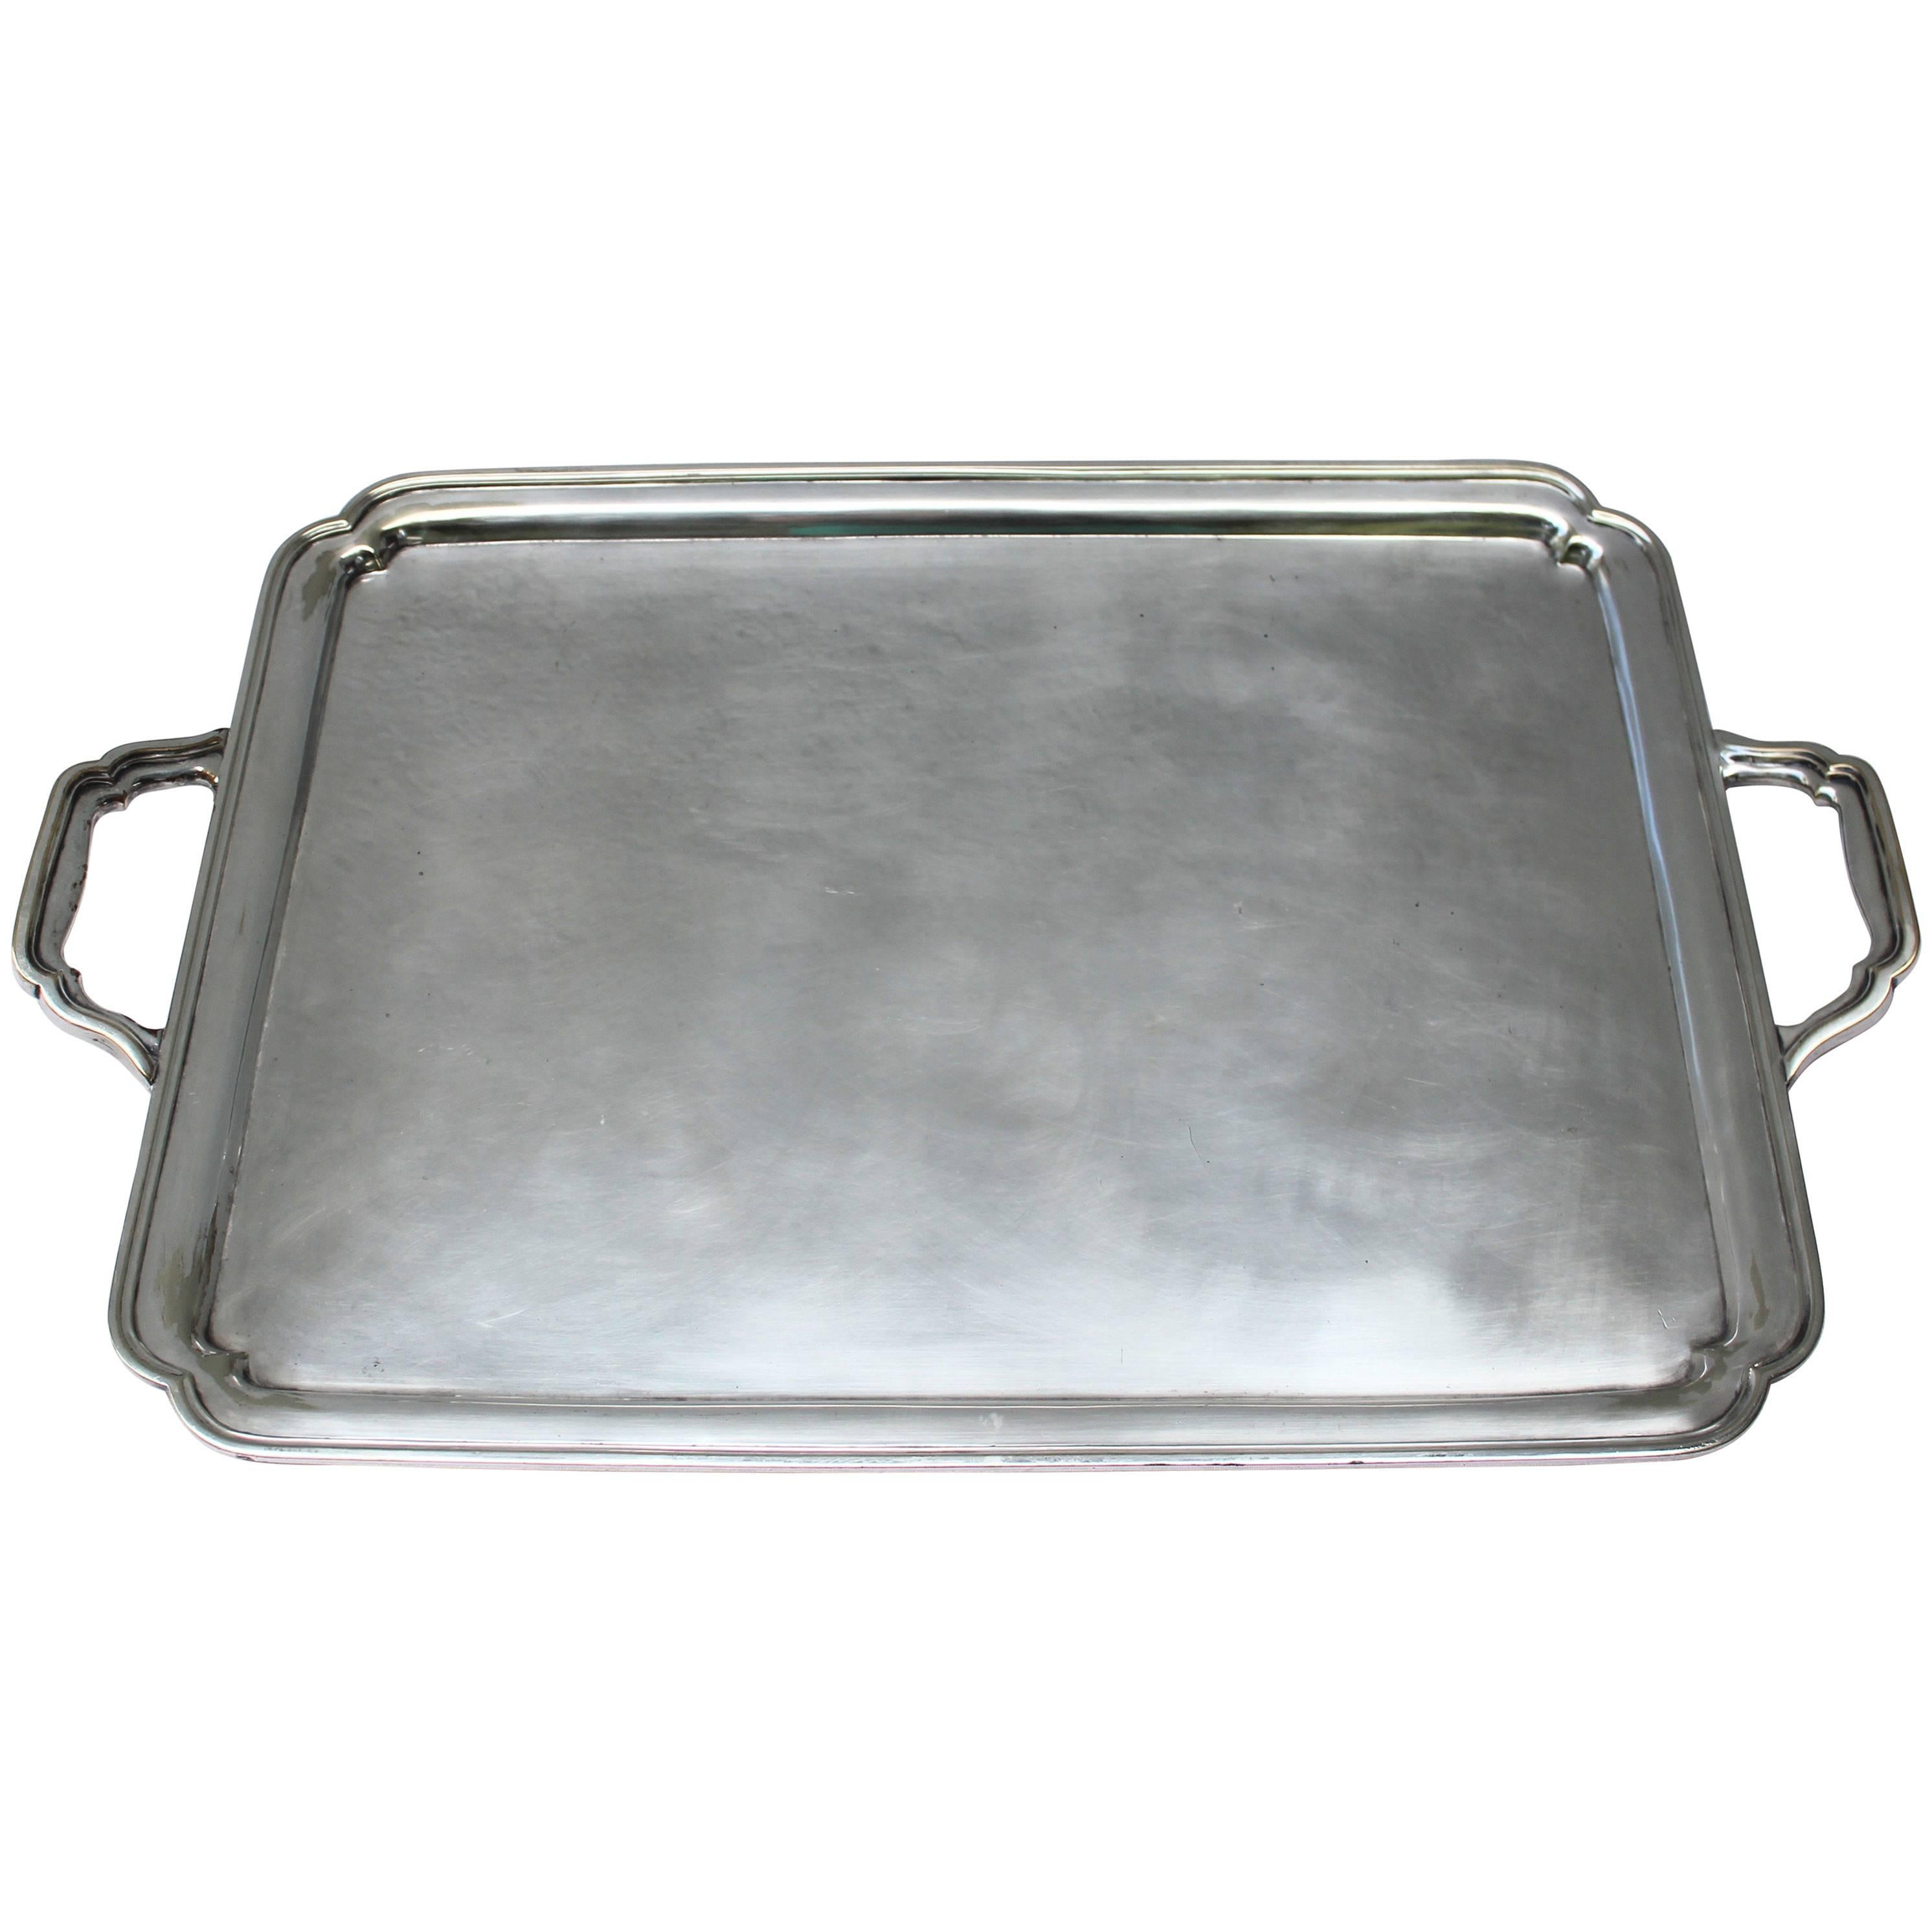 Large Rectangular Silver Plated Serving Tray